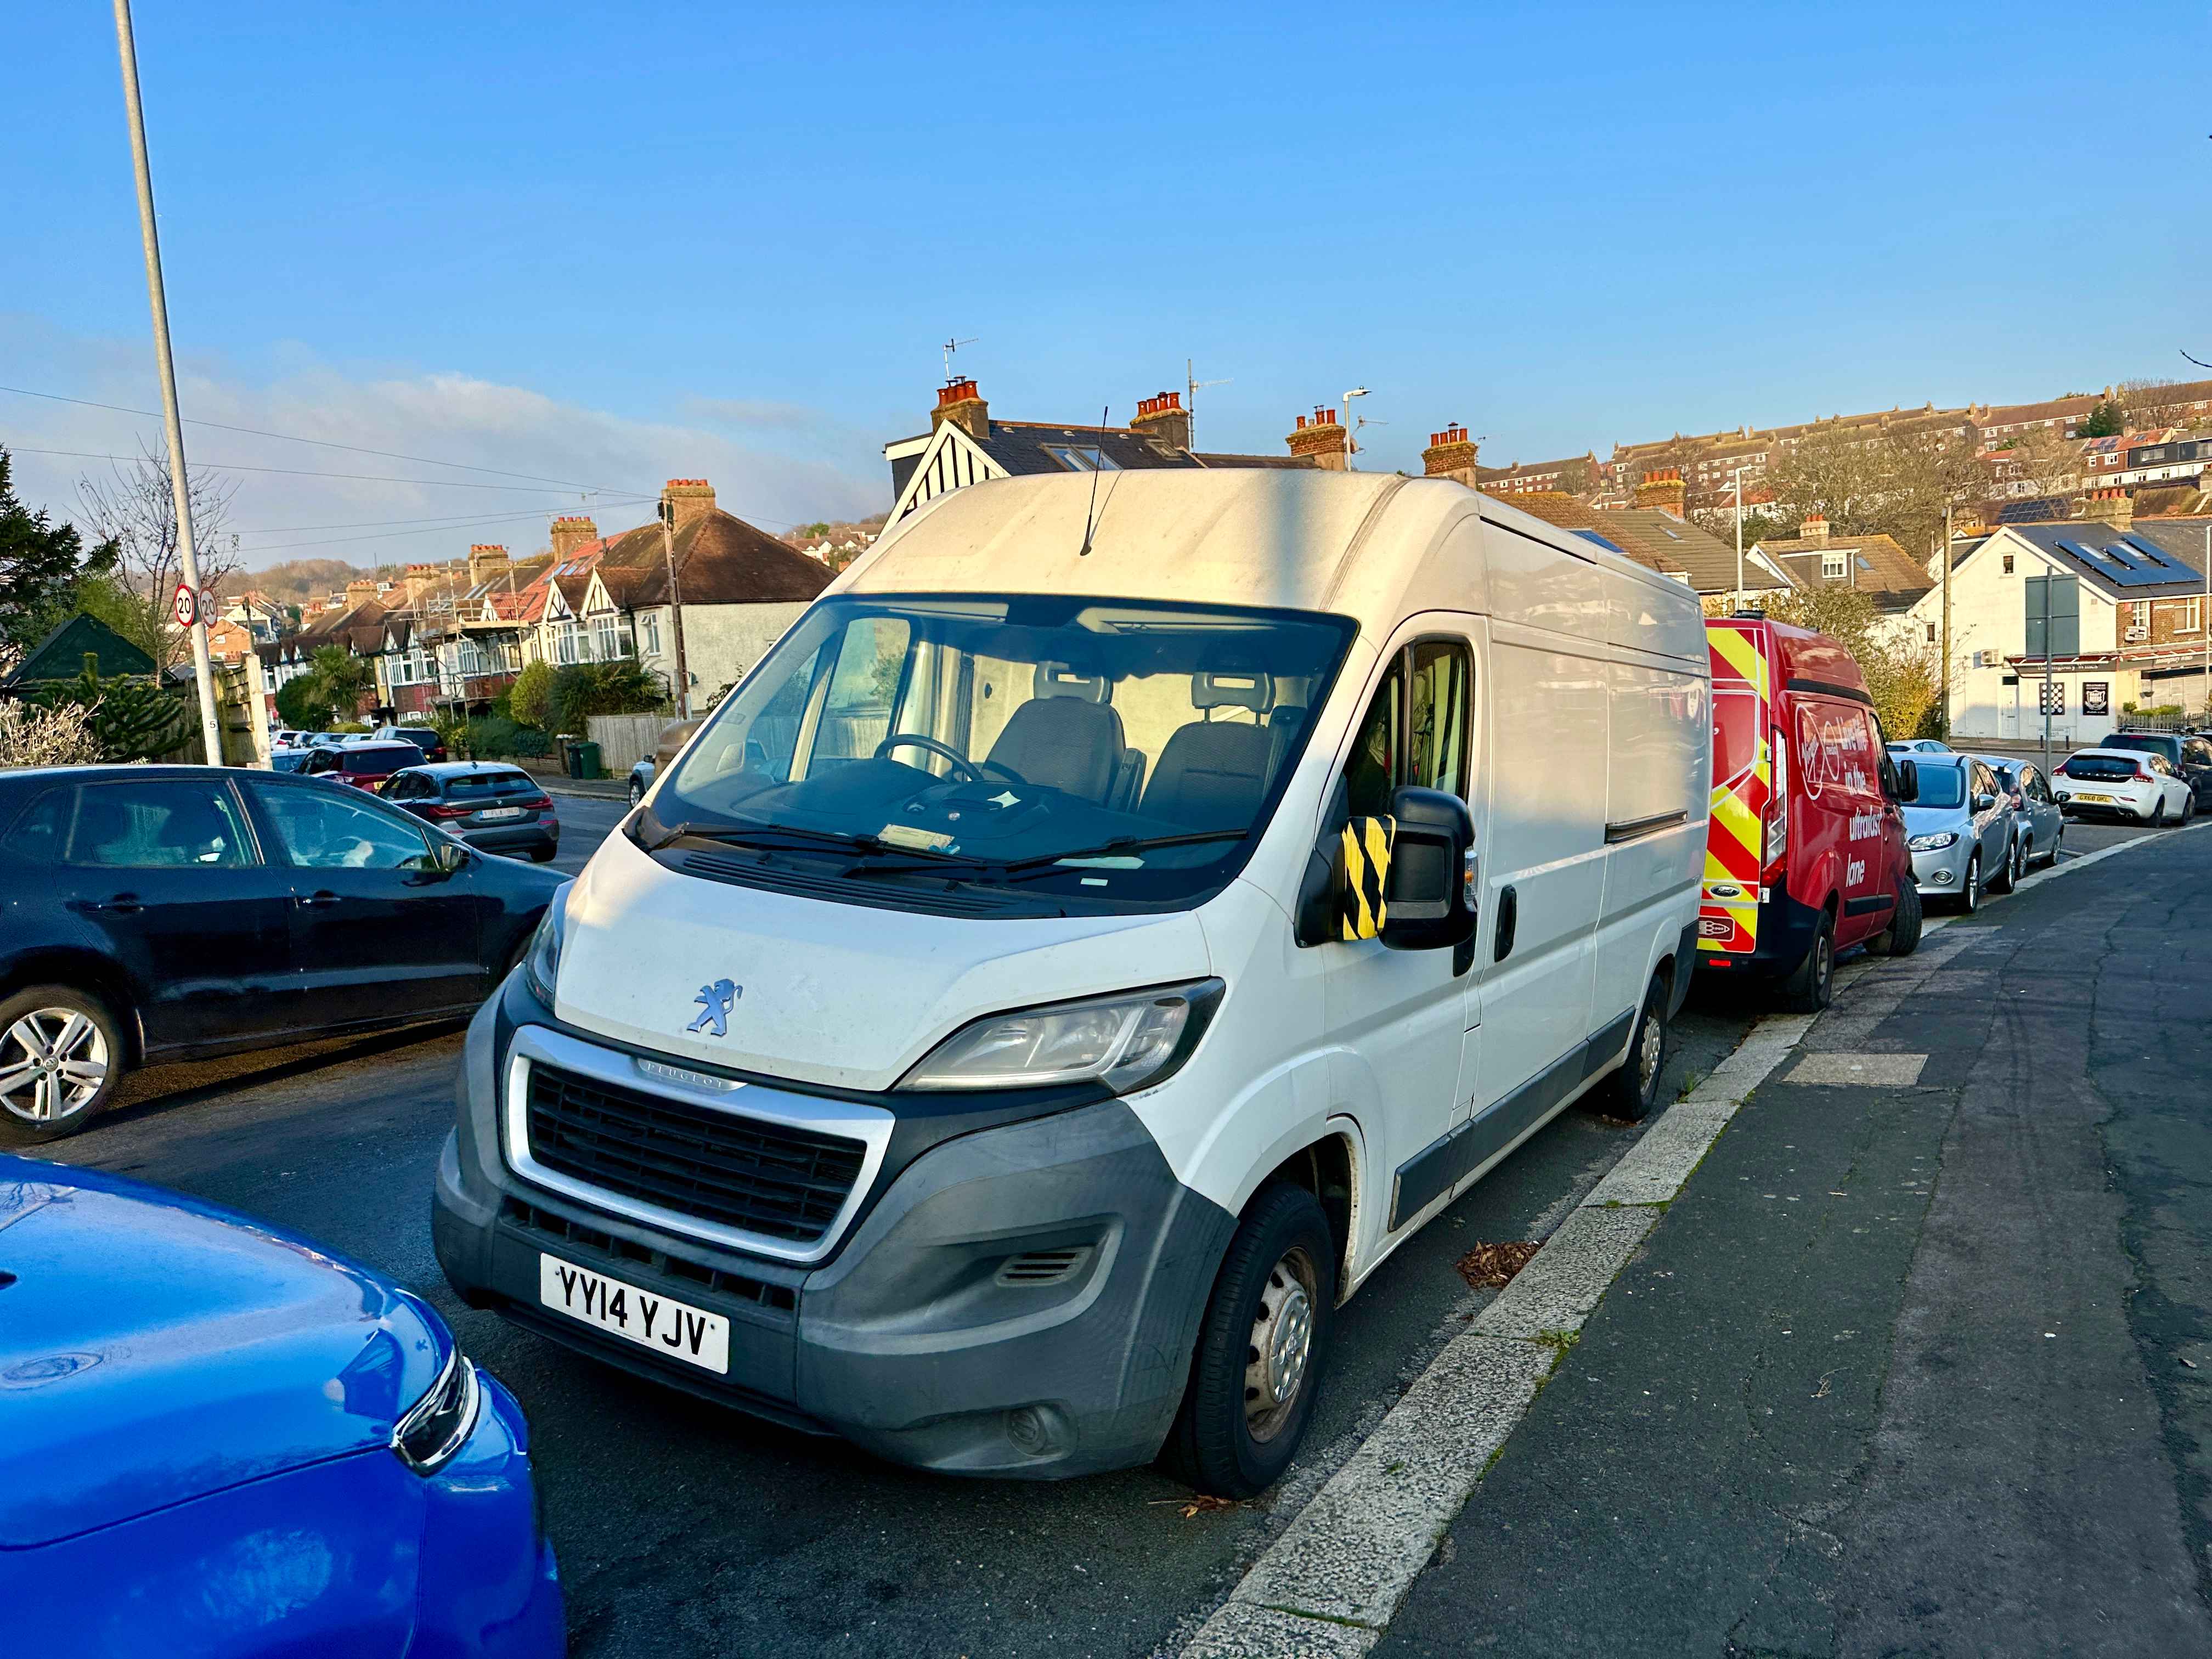 Photograph of YY14 YJV - a White Peugeot Boxer parked in Hollingdean by a non-resident. The third of three photographs supplied by the residents of Hollingdean.